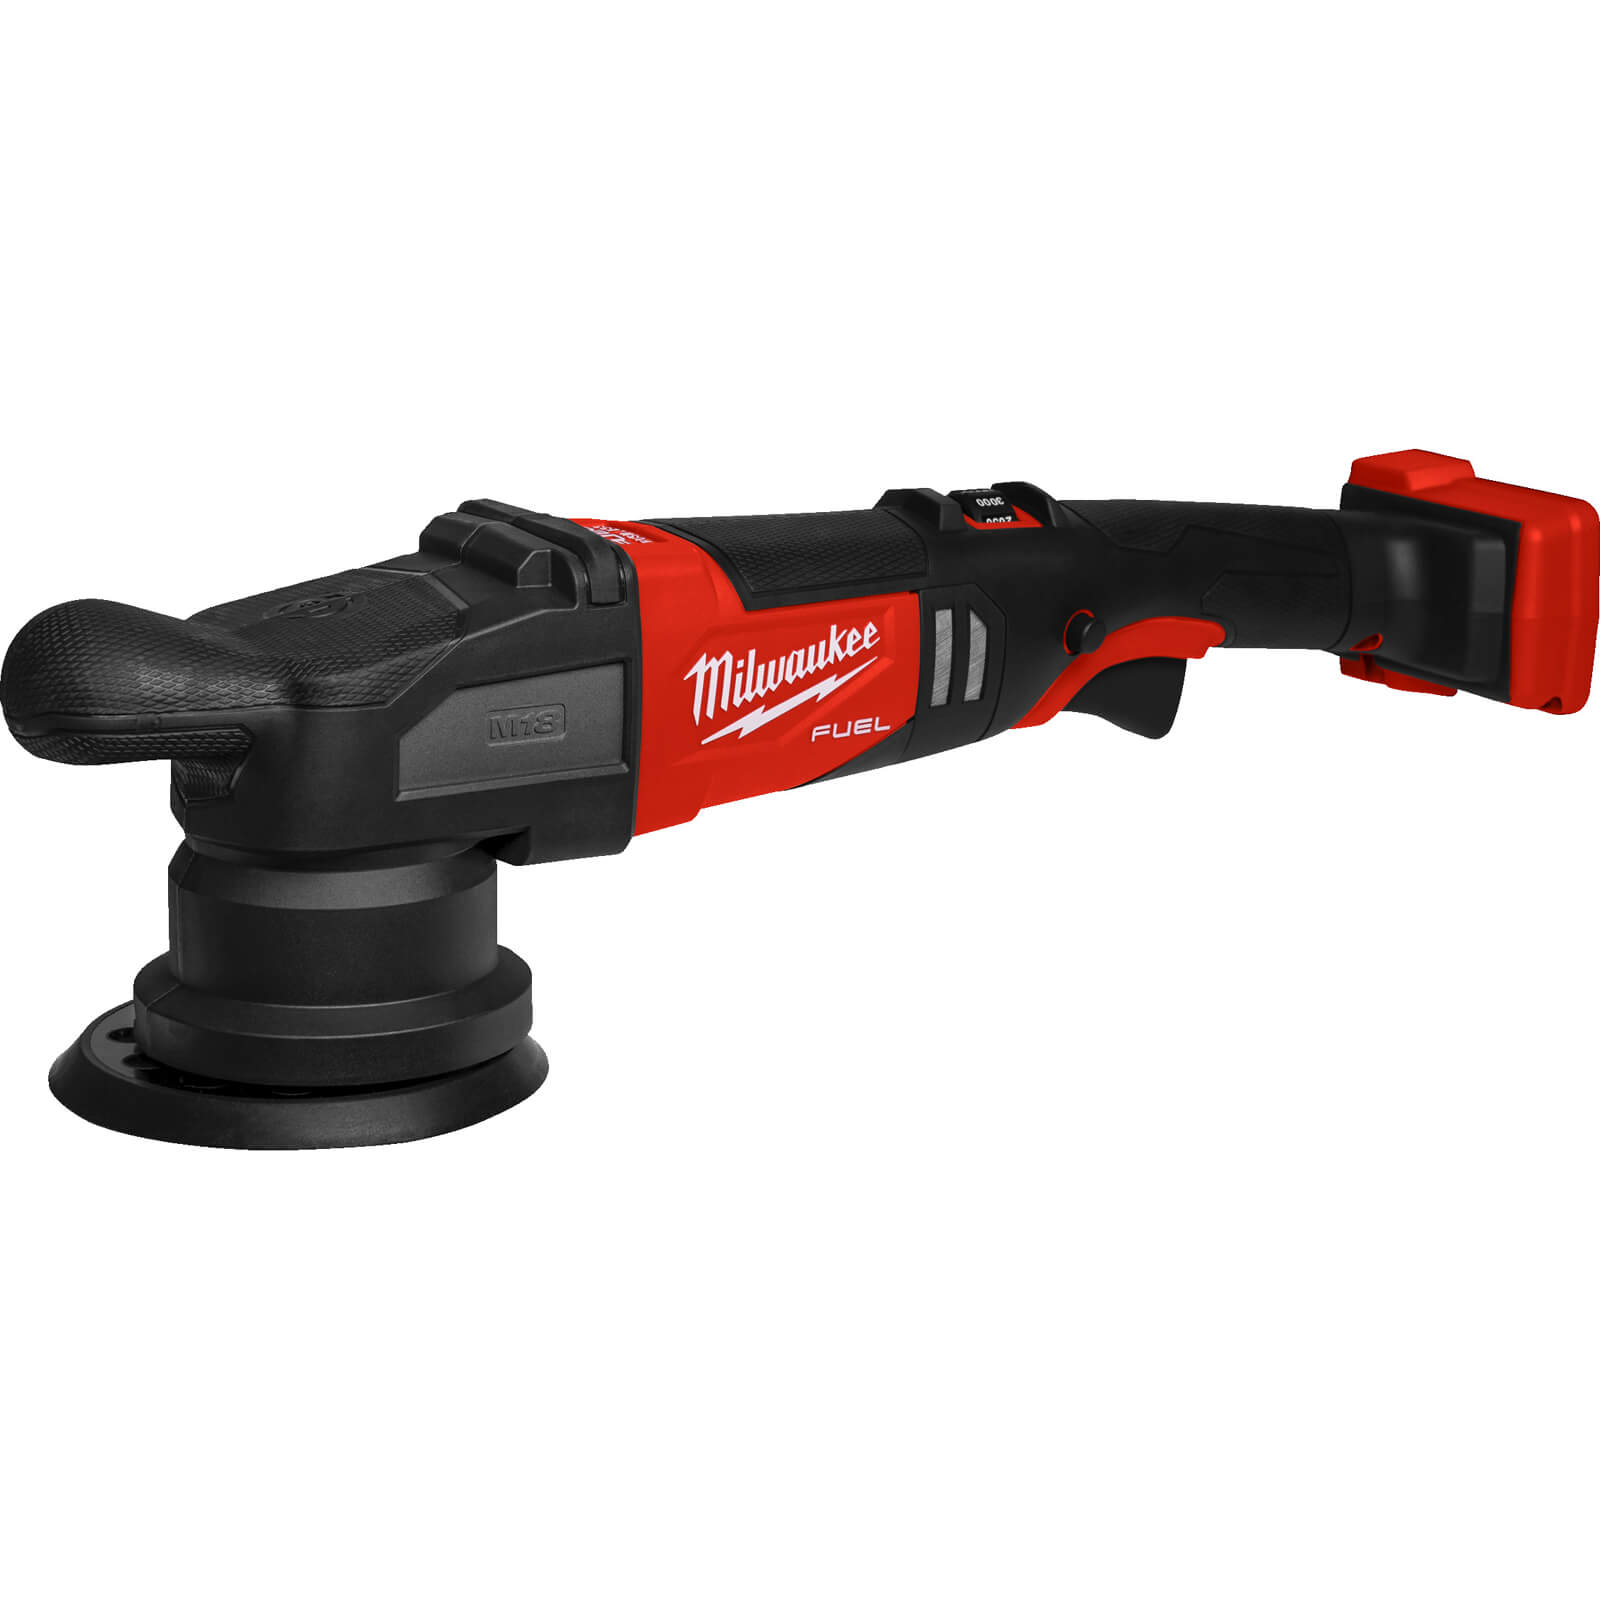 Image of Milwaukee M18 FROP15 Fuel 18v Cordless Brushless Random Orbit Polisher 125mm No Batteries No Charger Case